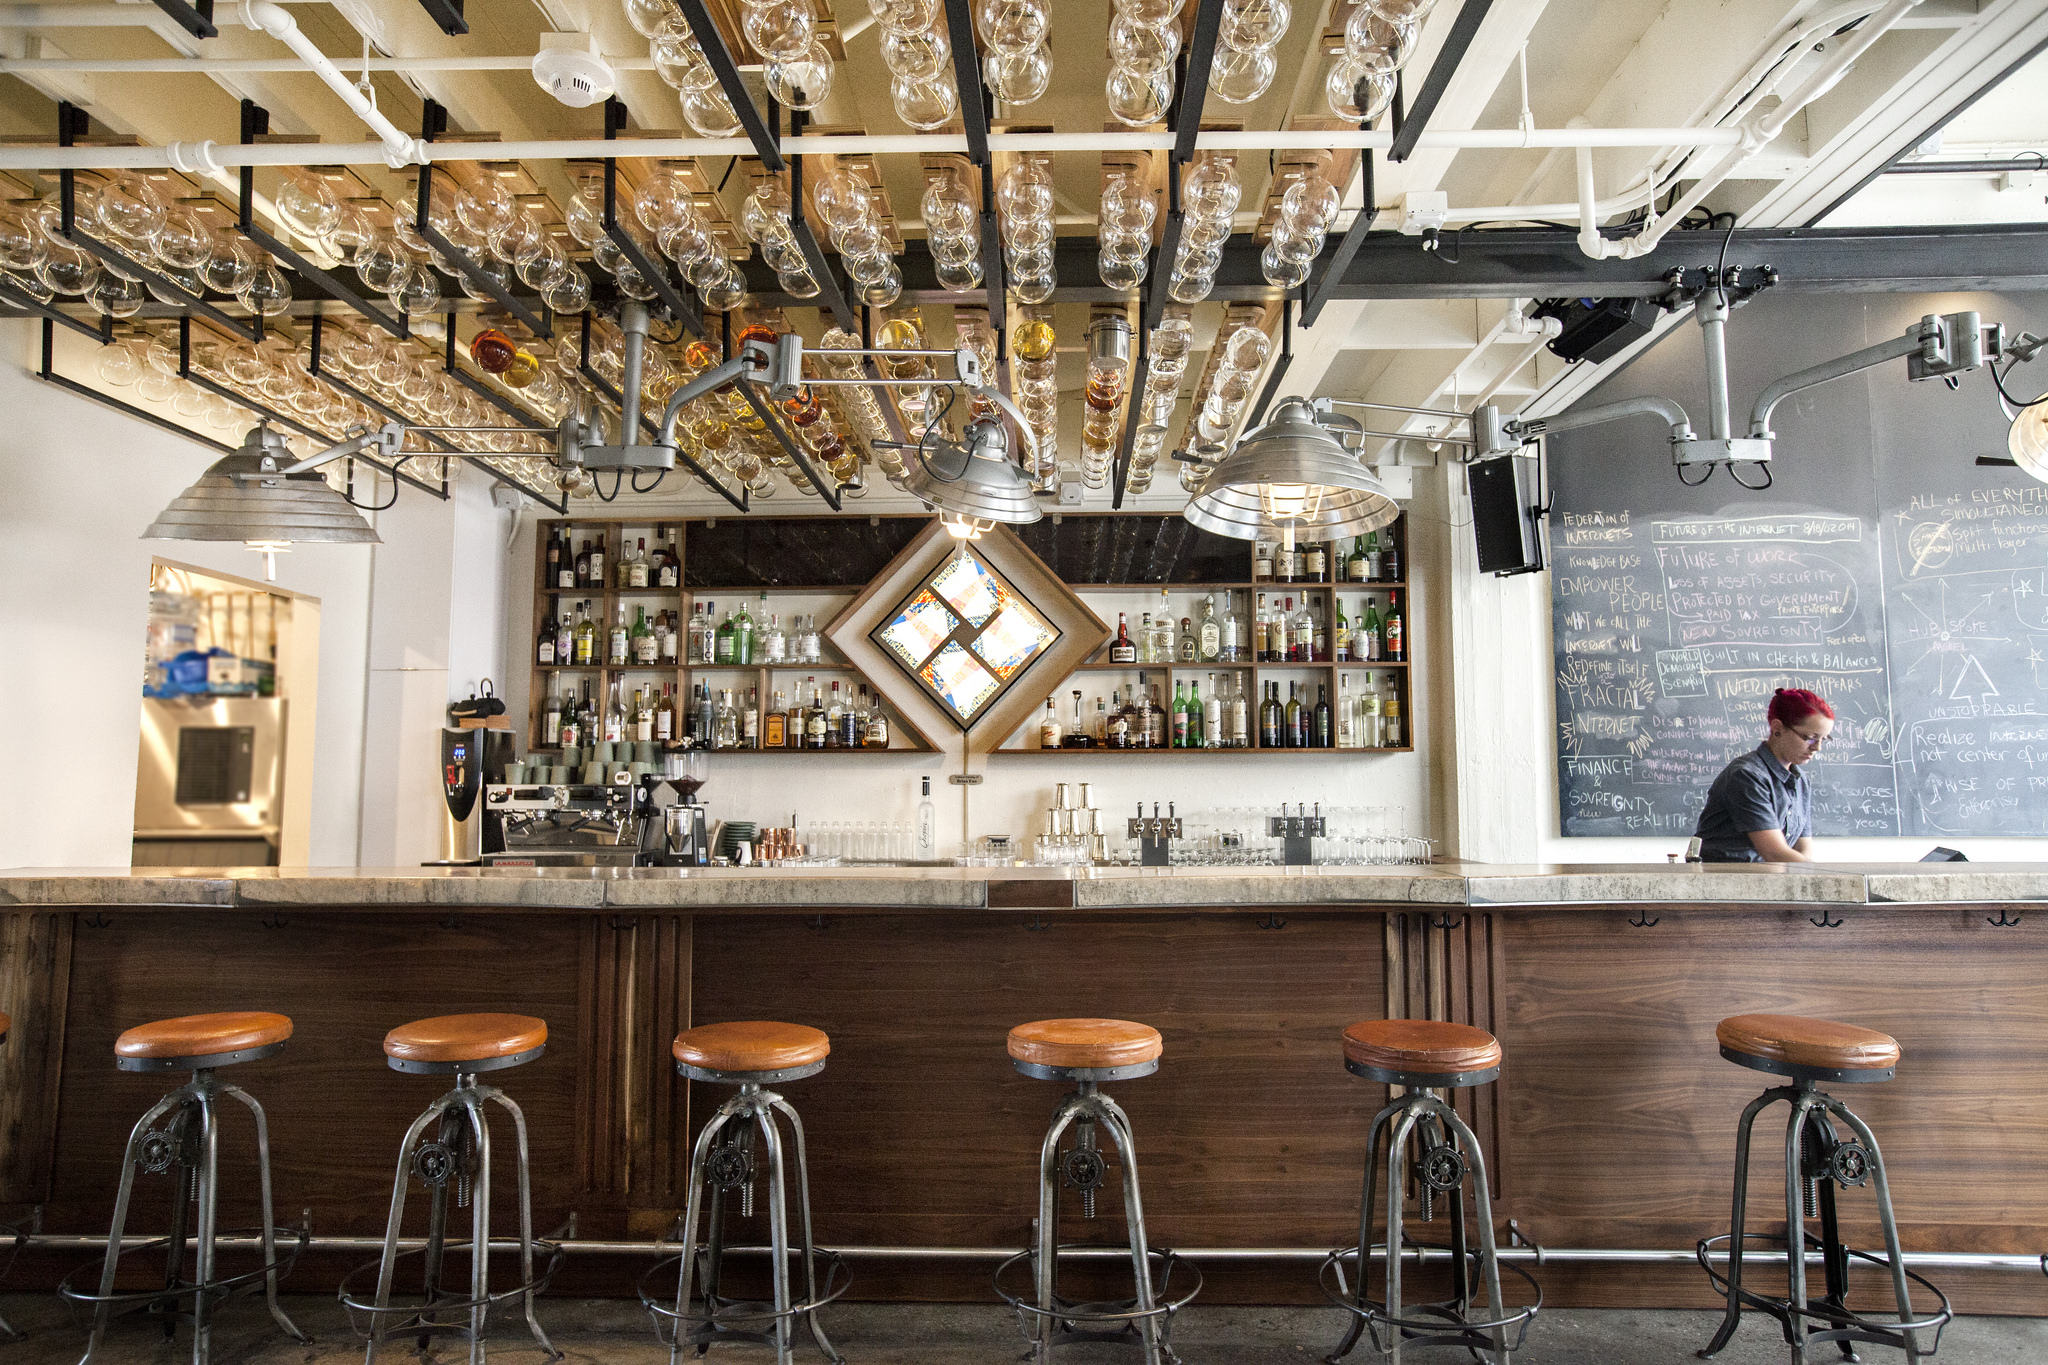  &nbsp;When The Longnow came to us with the desire to redesign their space, we jumped at the opportunity. In the 1930’s, it was a blacksmith shop. Now, it is a cafe in the daytime that transforms into a bar &amp; oratory venue at night. We've designe